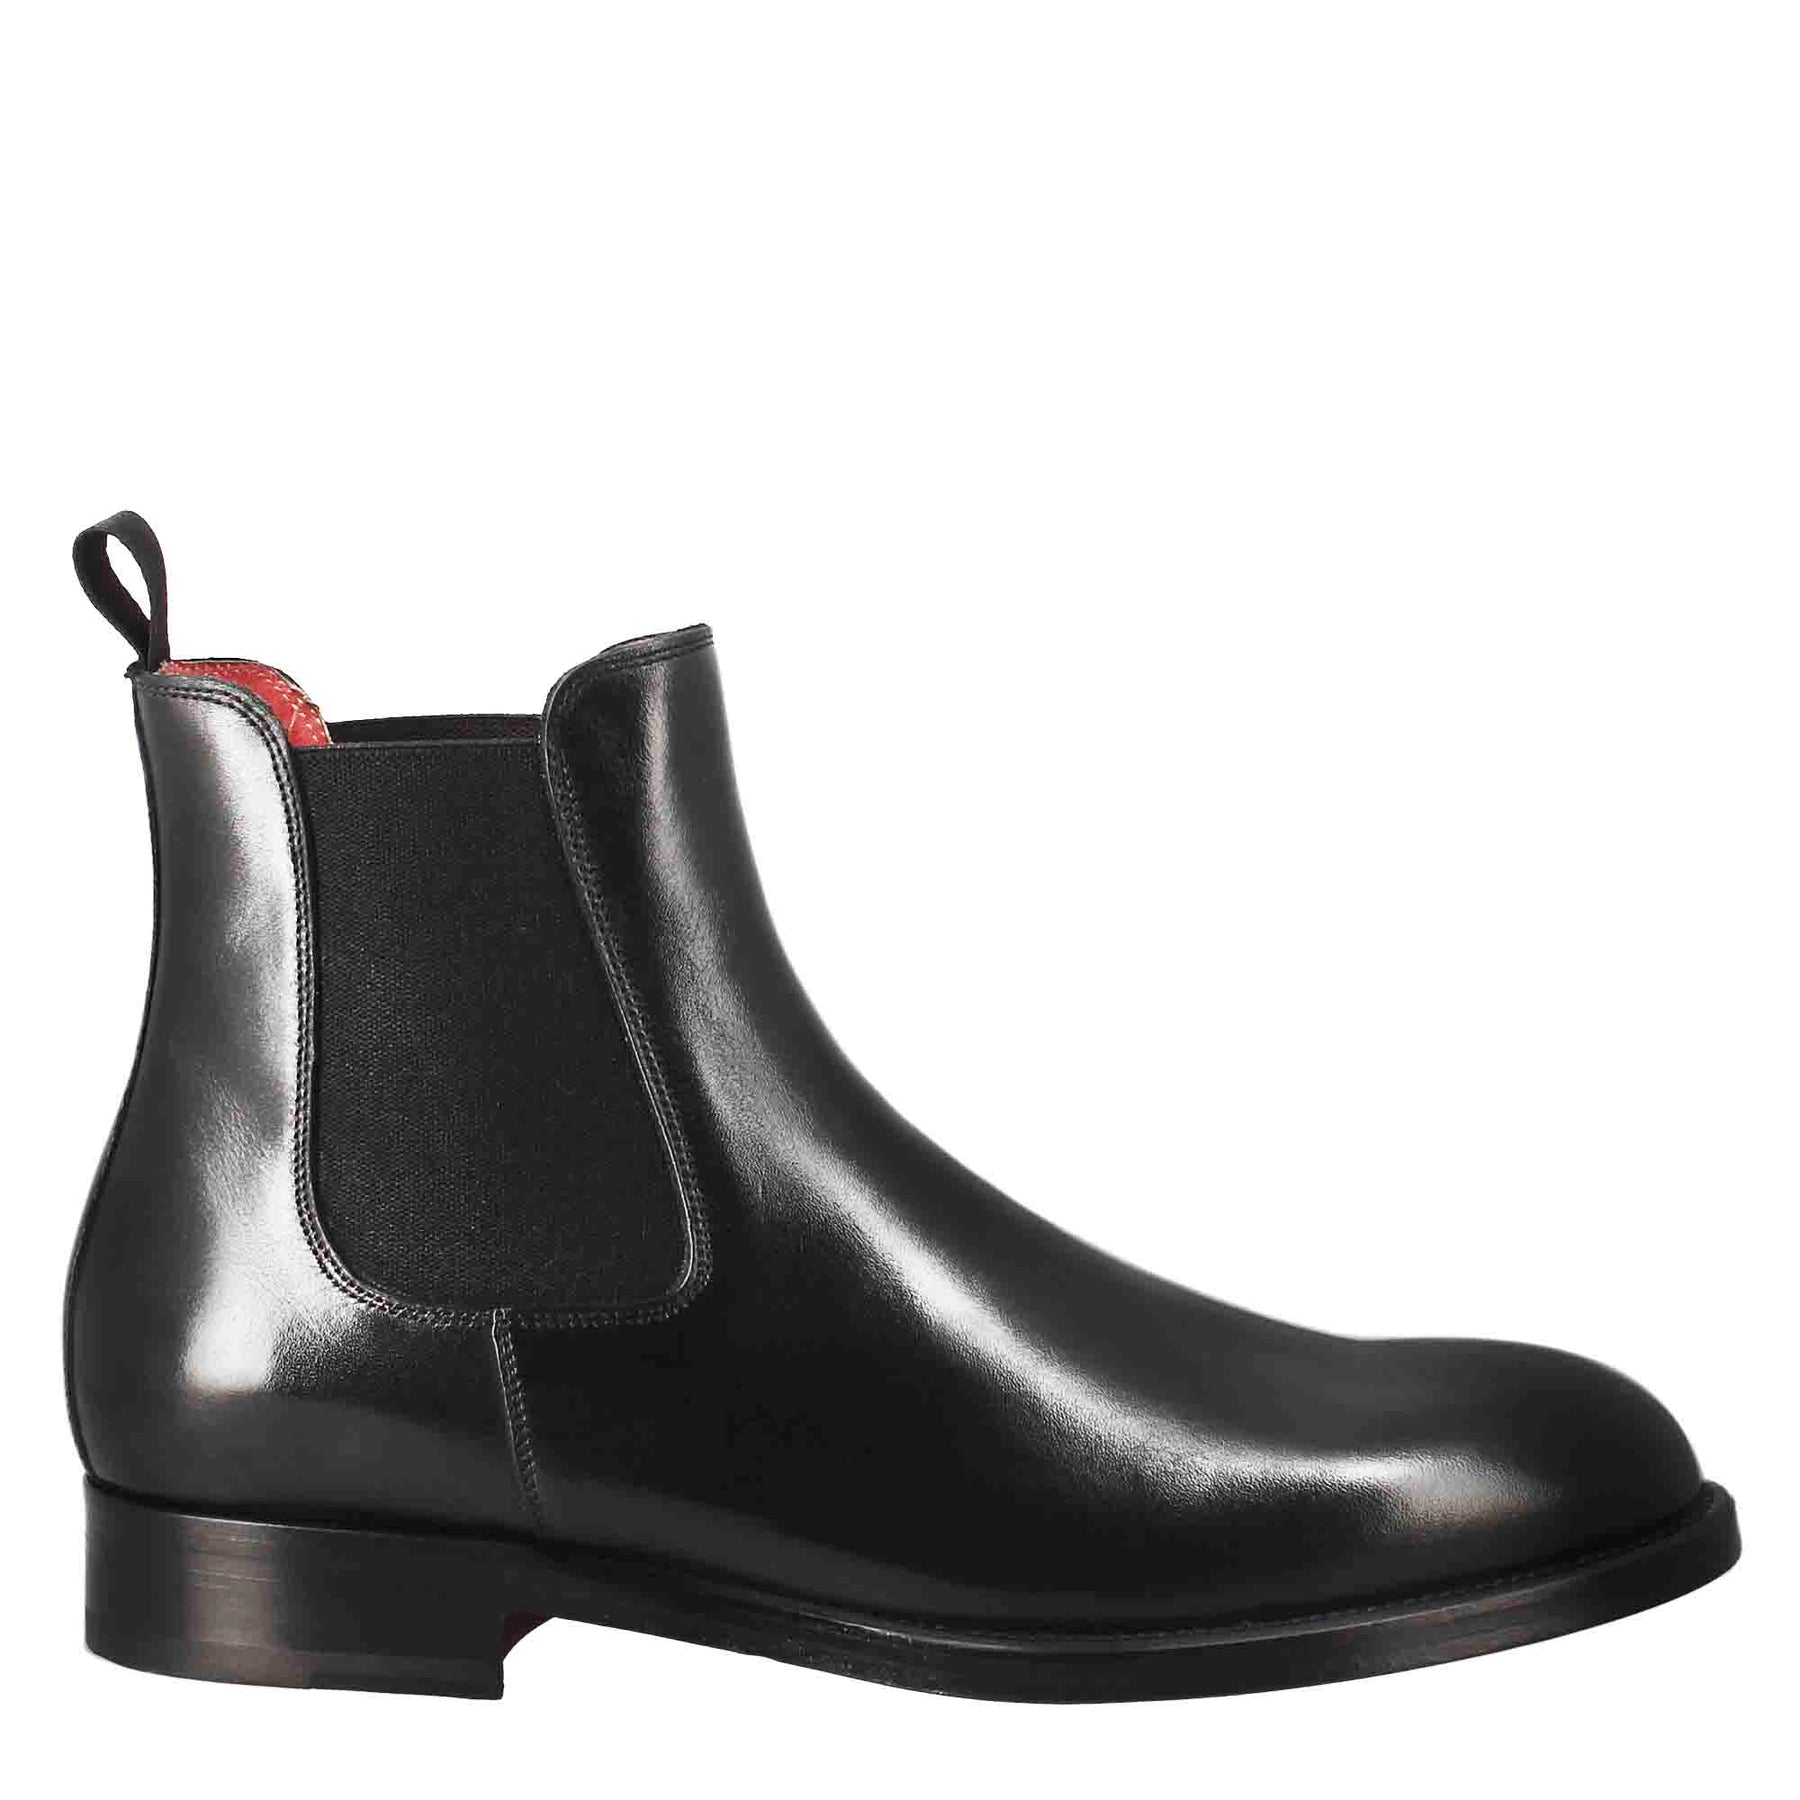 Men's Chelsea boot in black leather with elastic